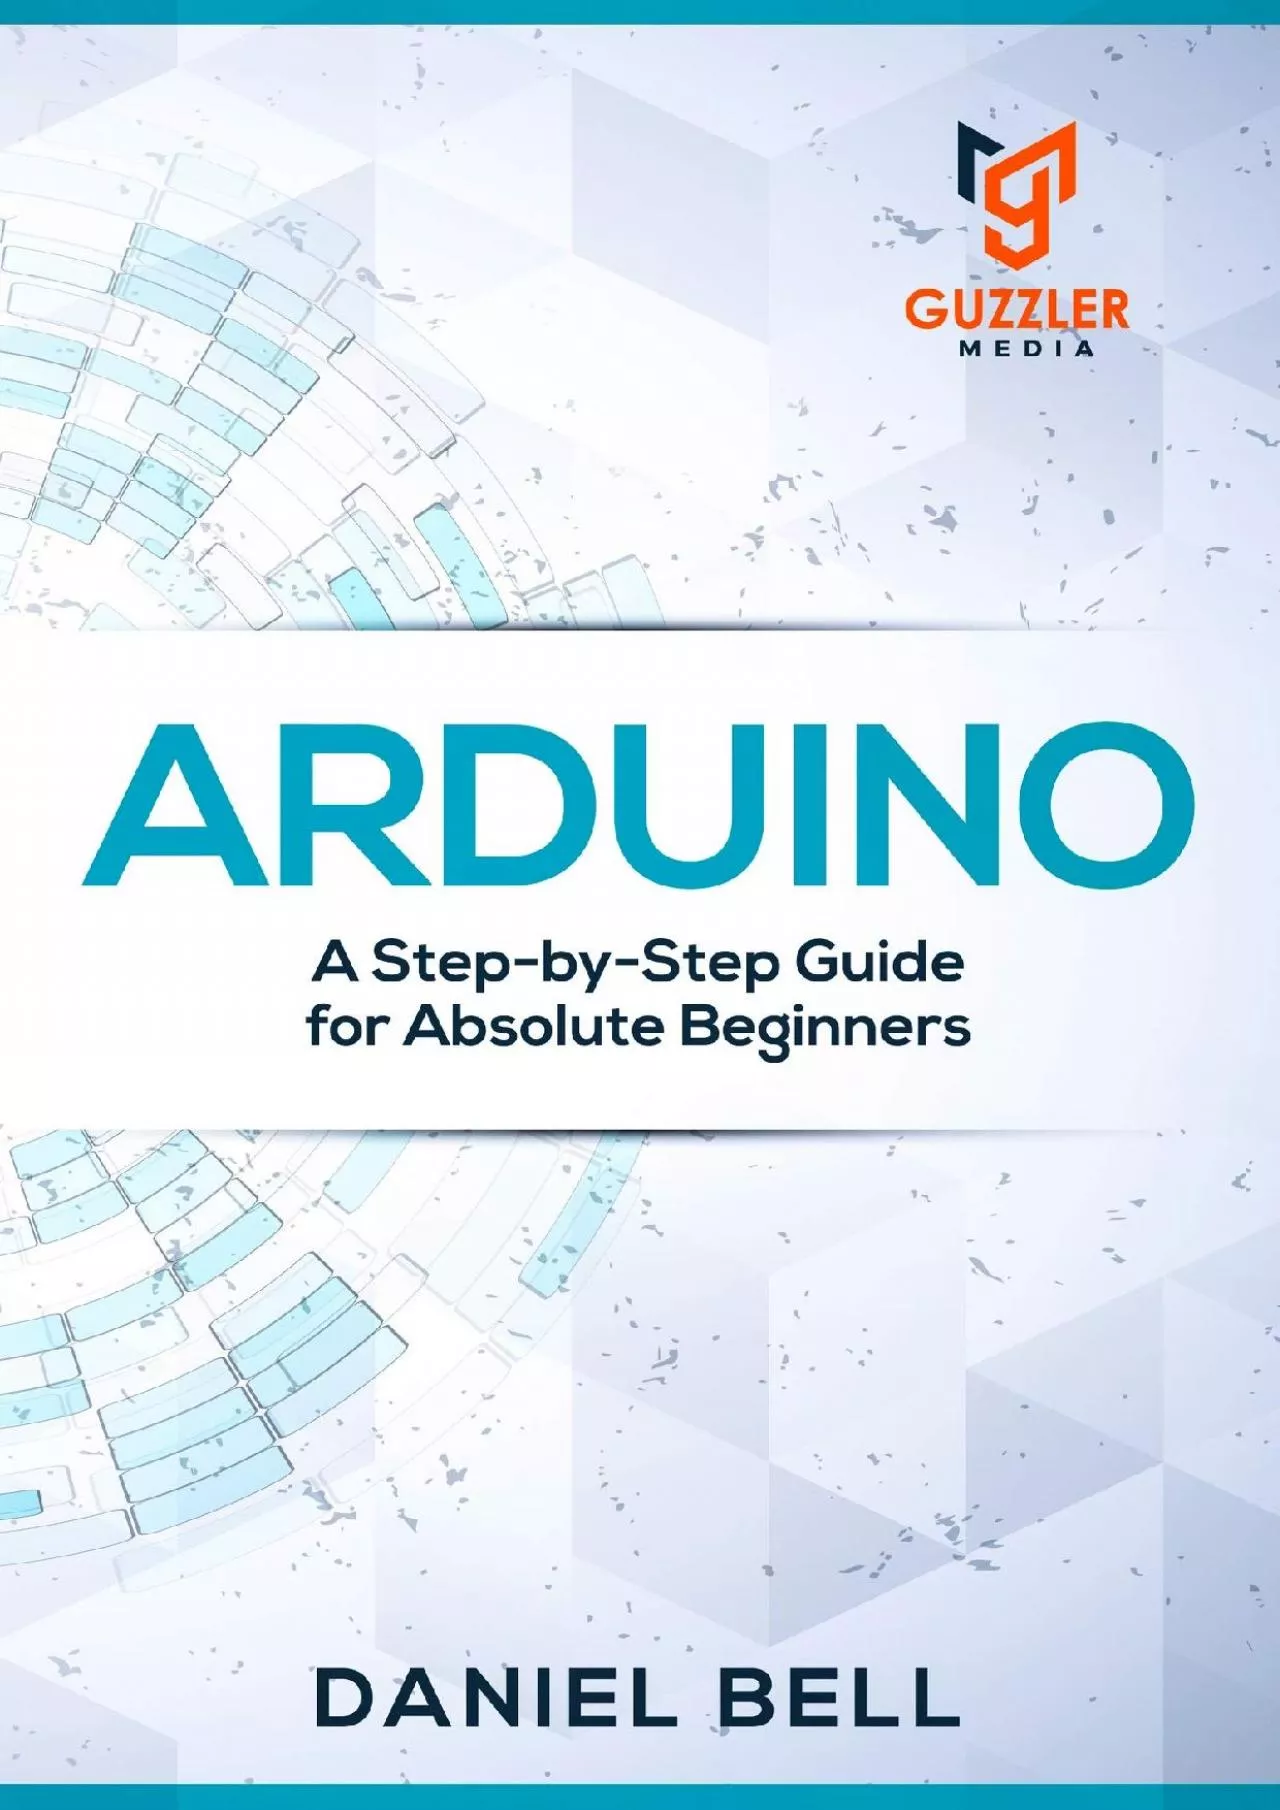 [READING BOOK]-Arduino: A Step-by-Step Guide for Absolute Beginners